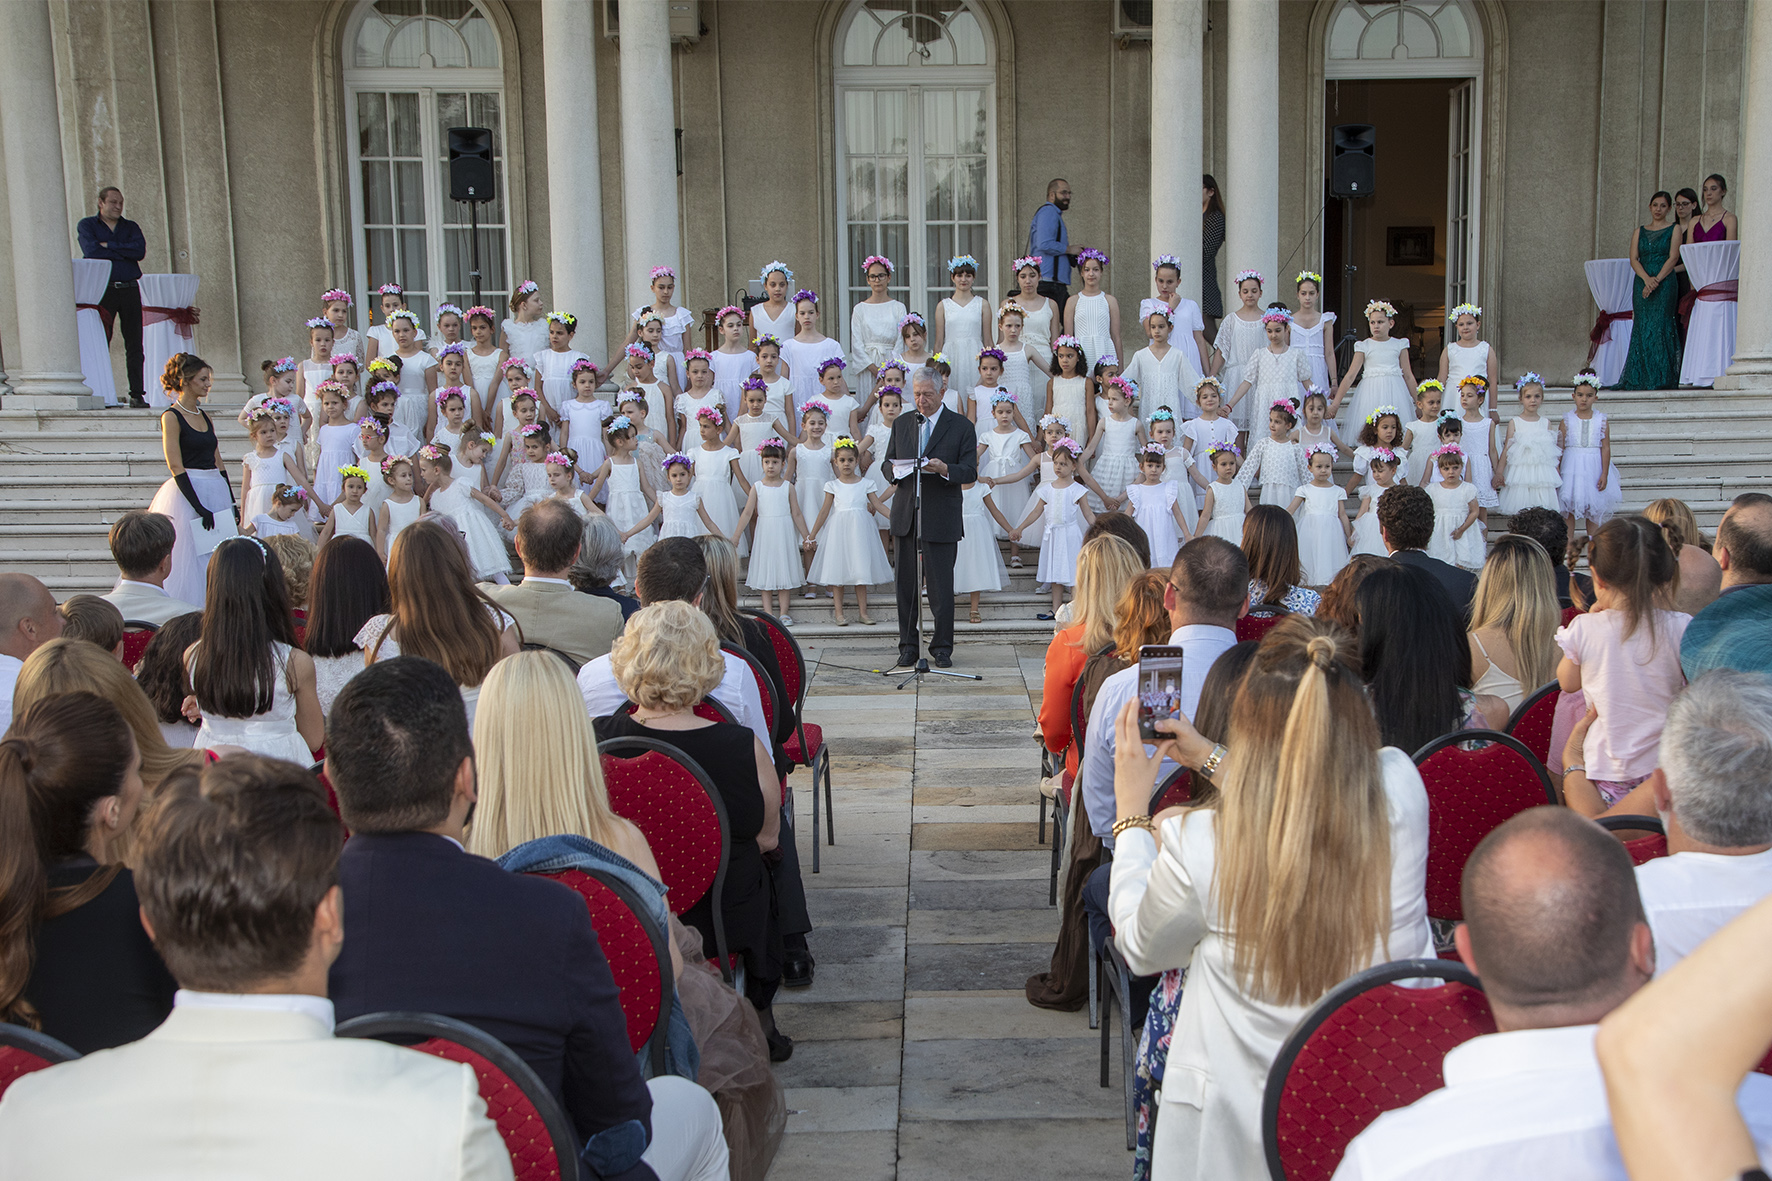 Gala concert “Magic Childhood” at the White Palace, under the patronage of HRH Crown prince Alexander